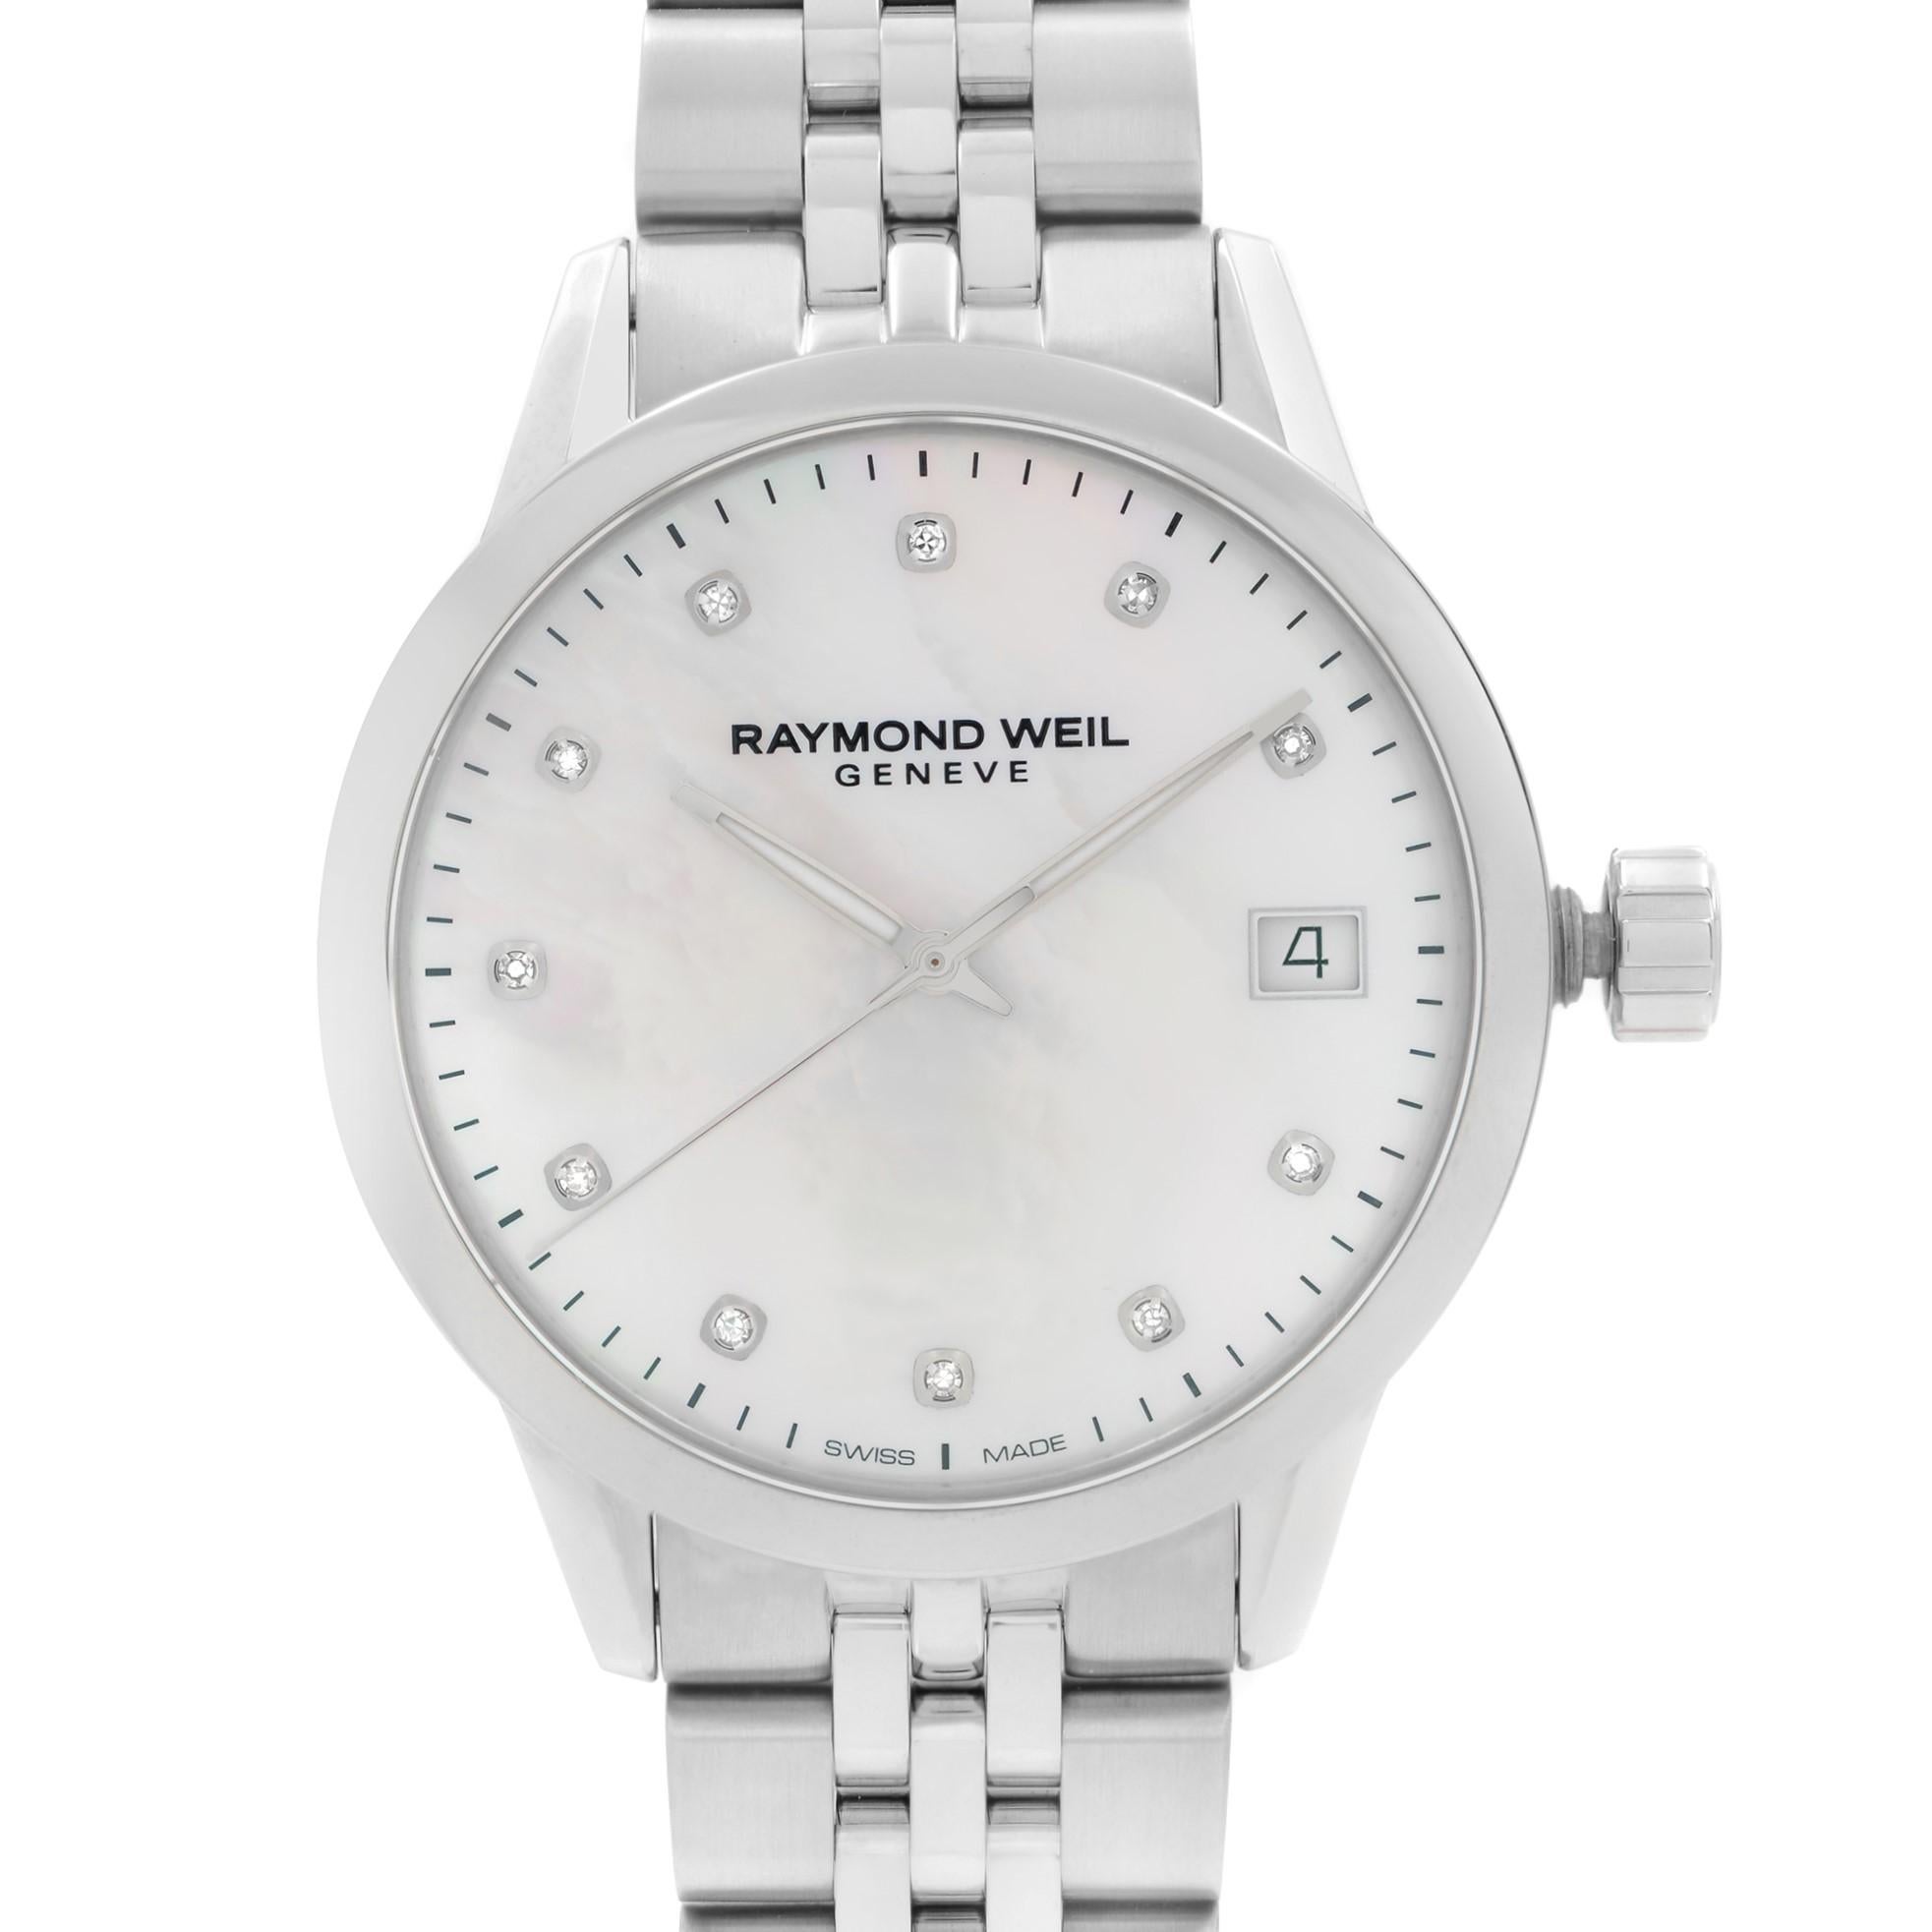 Unworn Raymond Weil Freelancer Steel Diamond MOP Dial Quartz Ladies Watch 5634-ST-97081. This Beautiful Timepiece Features: Stainless Steel Case and Bracelet, Fixed Stainless Steel Bezel, Mother-of-Pearl Dial with Luminous Silver-Tone Hands, And